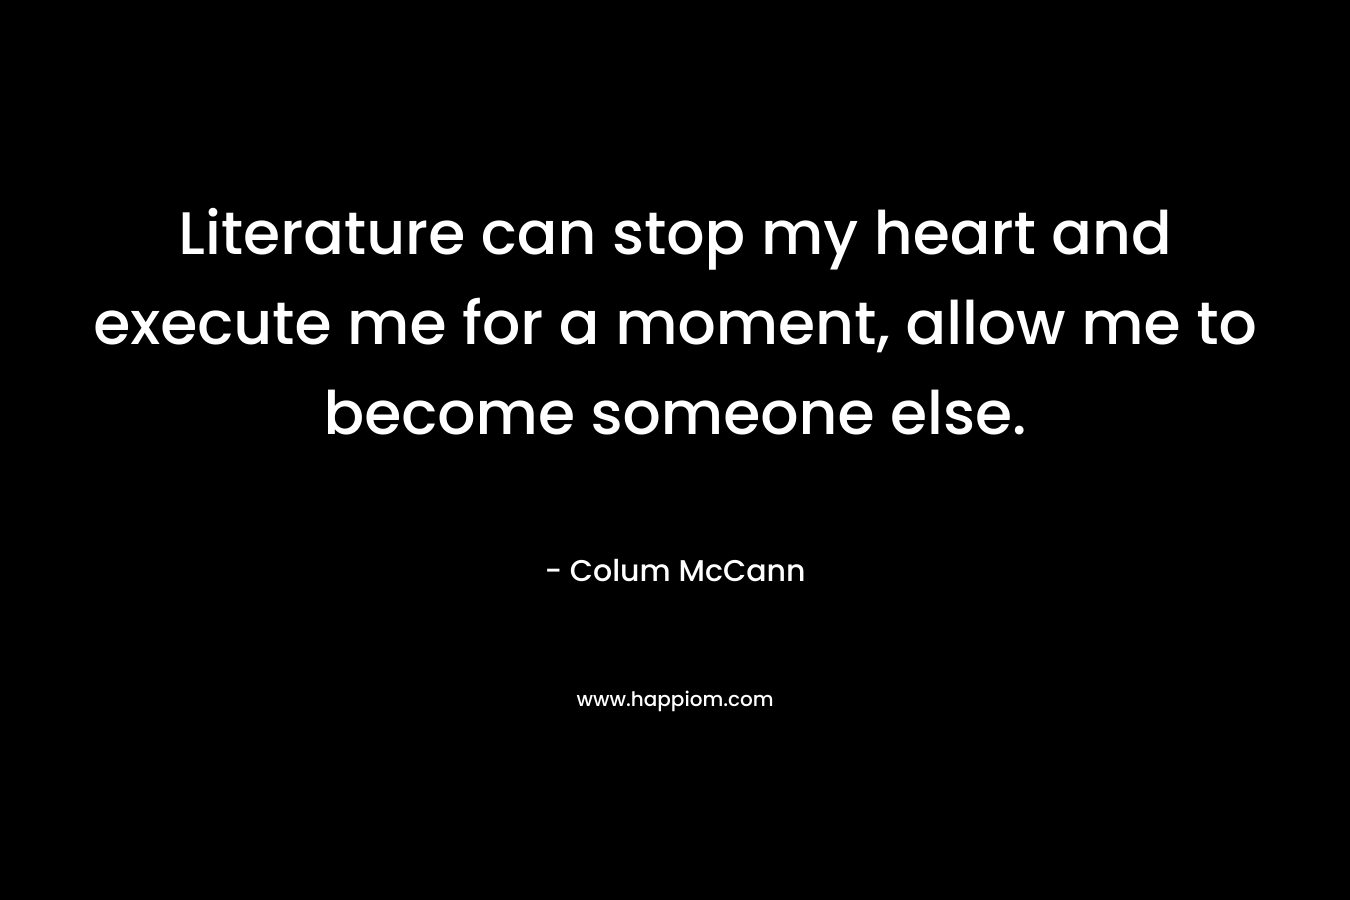 Literature can stop my heart and execute me for a moment, allow me to become someone else.